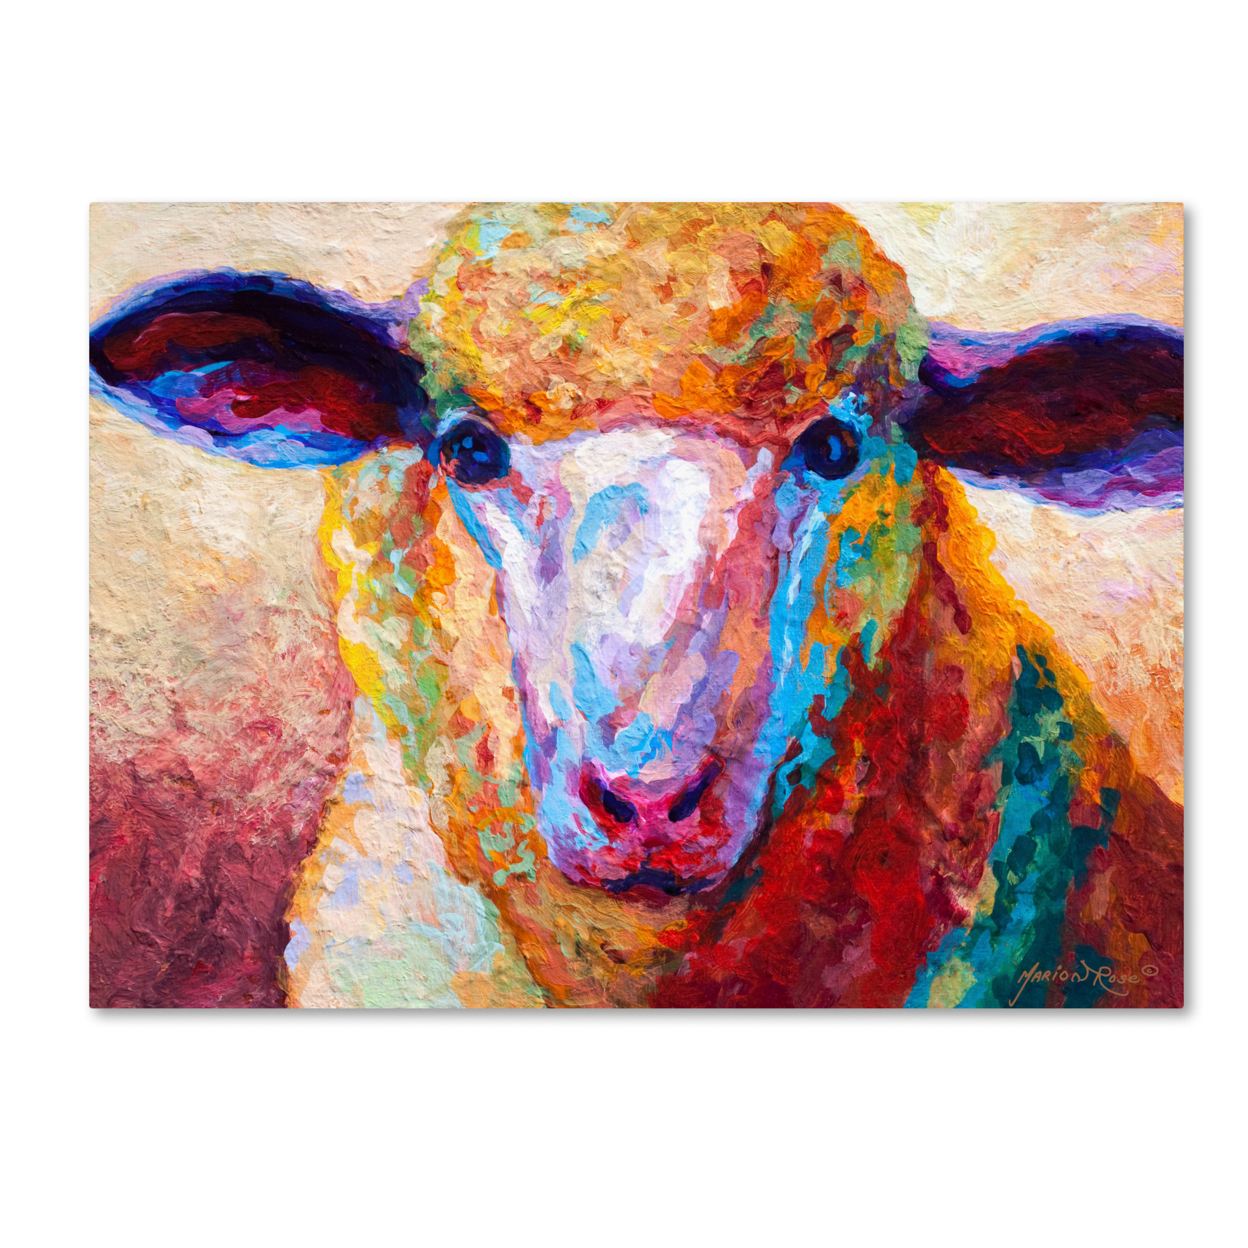 Marion Rose 'Dorset Ewe' Ready To Hang Canvas Art 24 X 32 Inches Made In USA